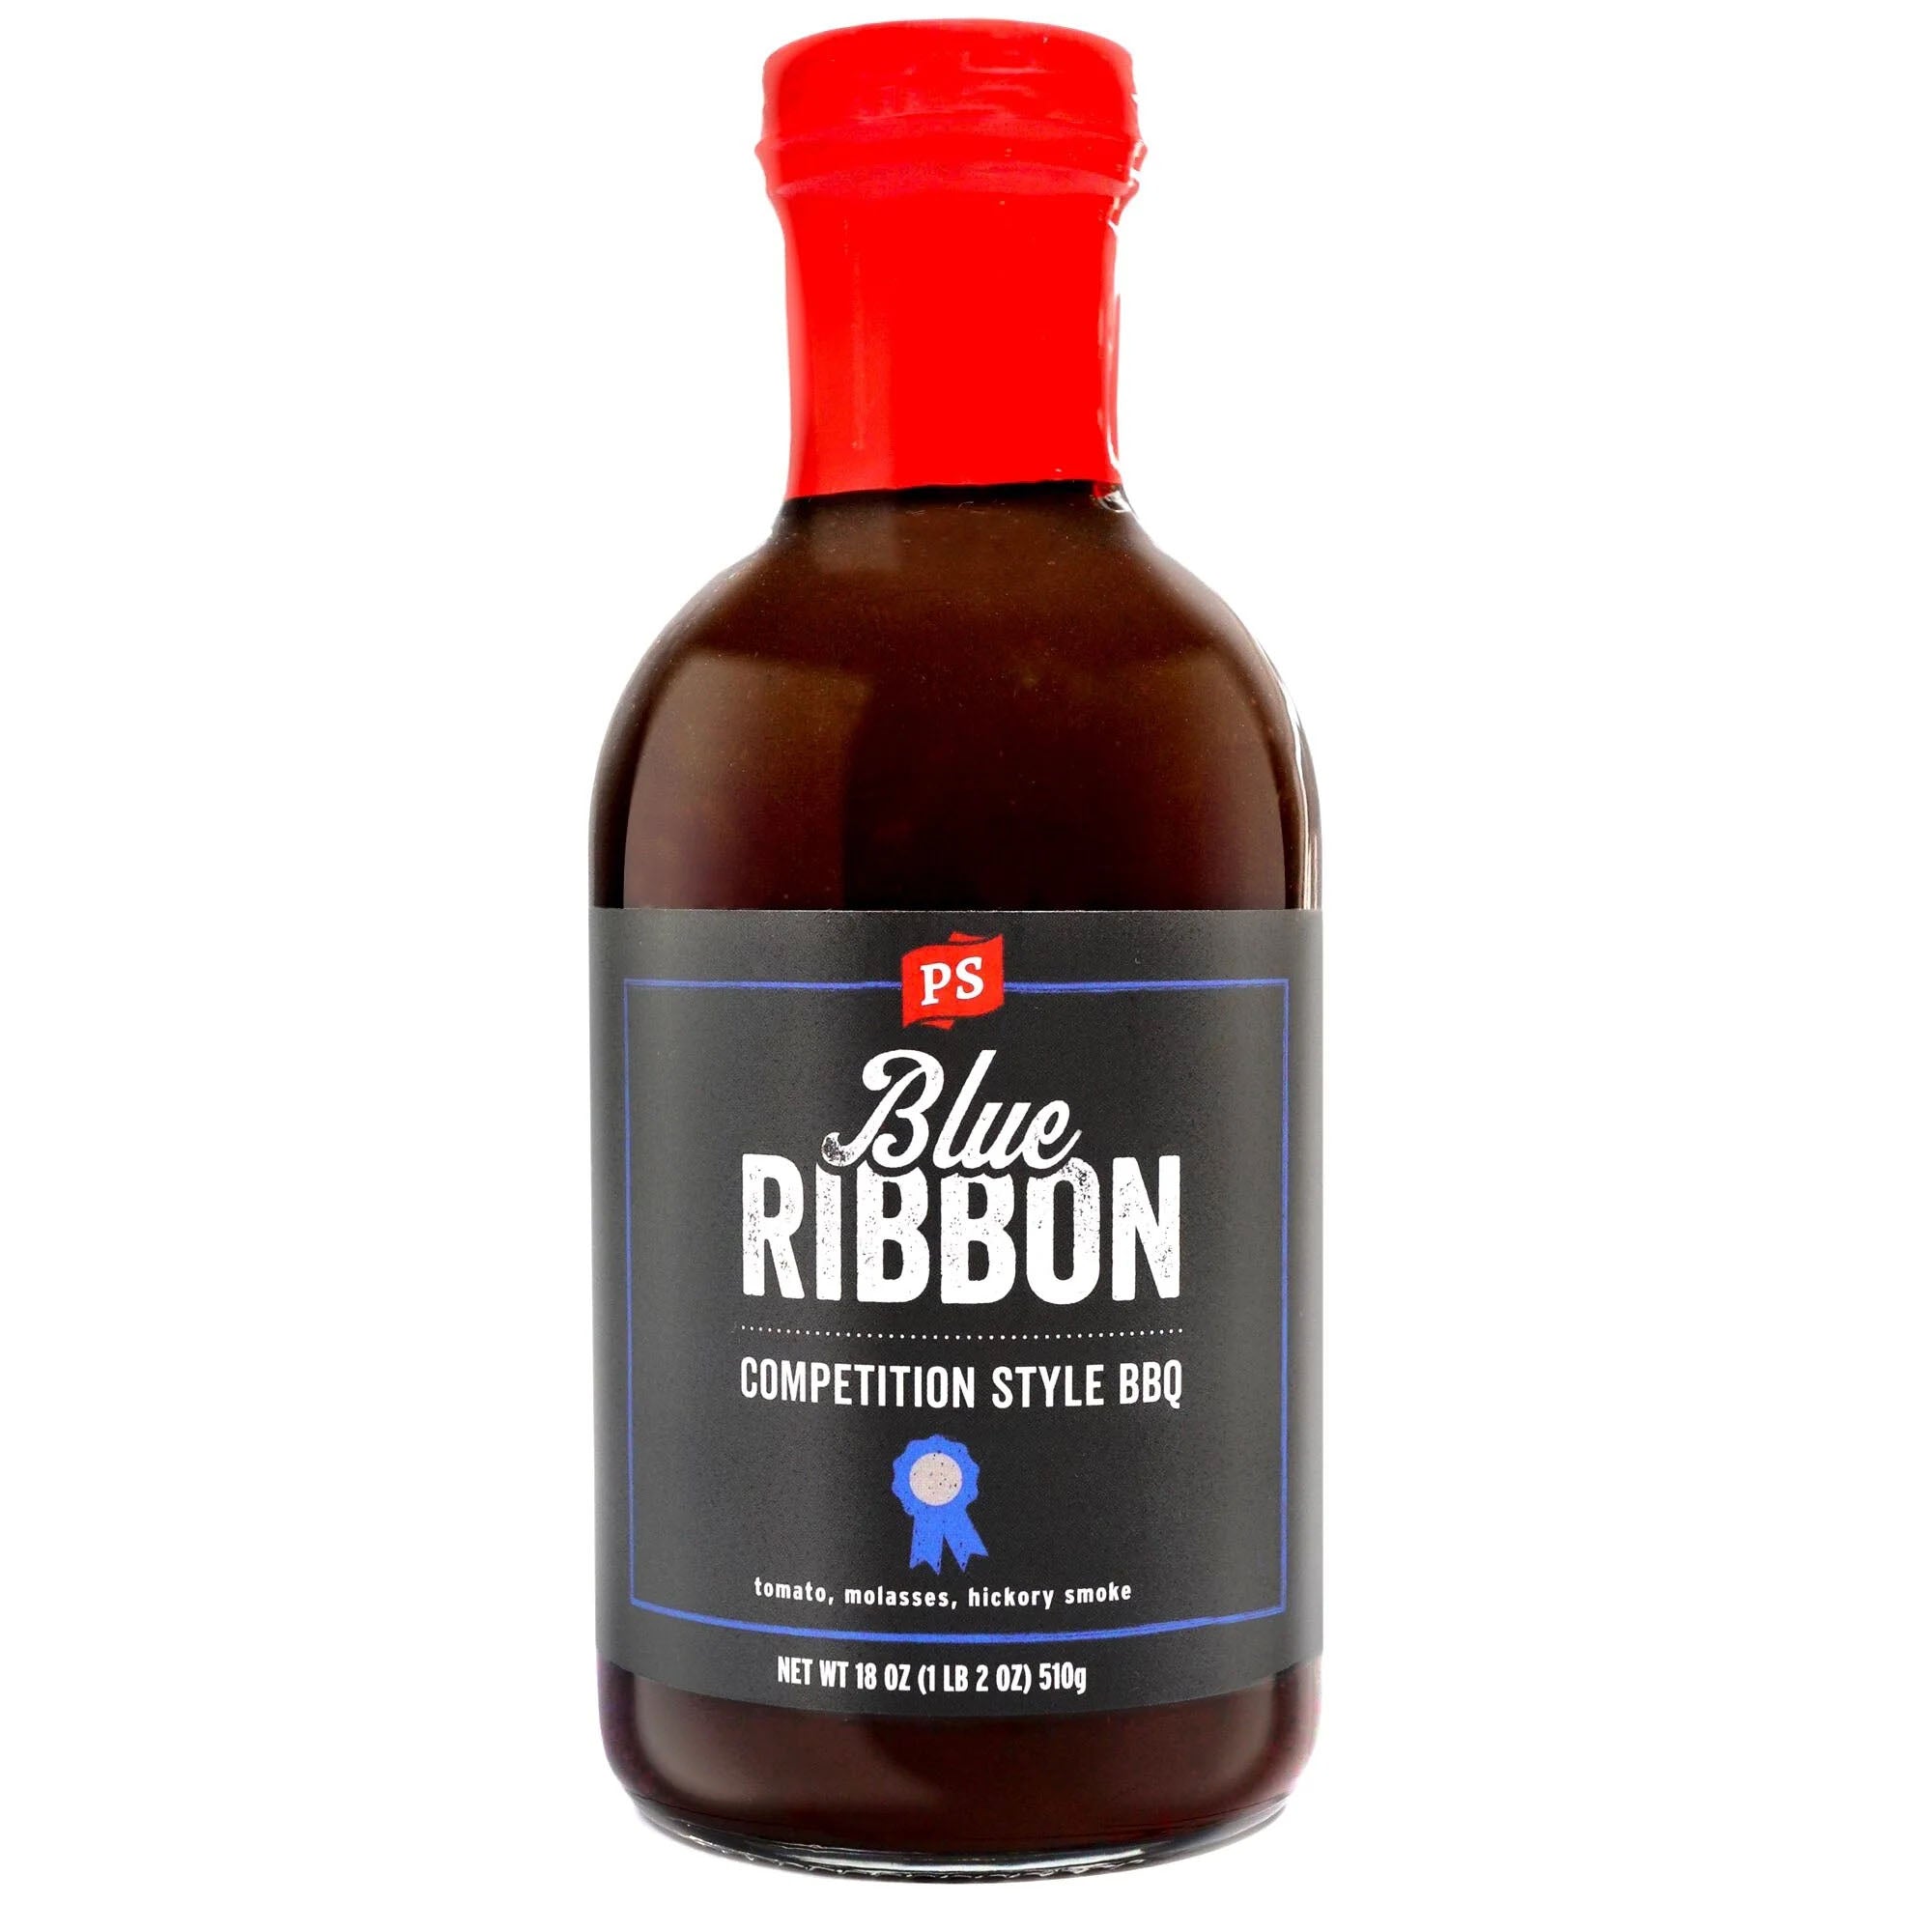 PS Seasoning Blue Ribbon — Competition Style BBQ Sauce